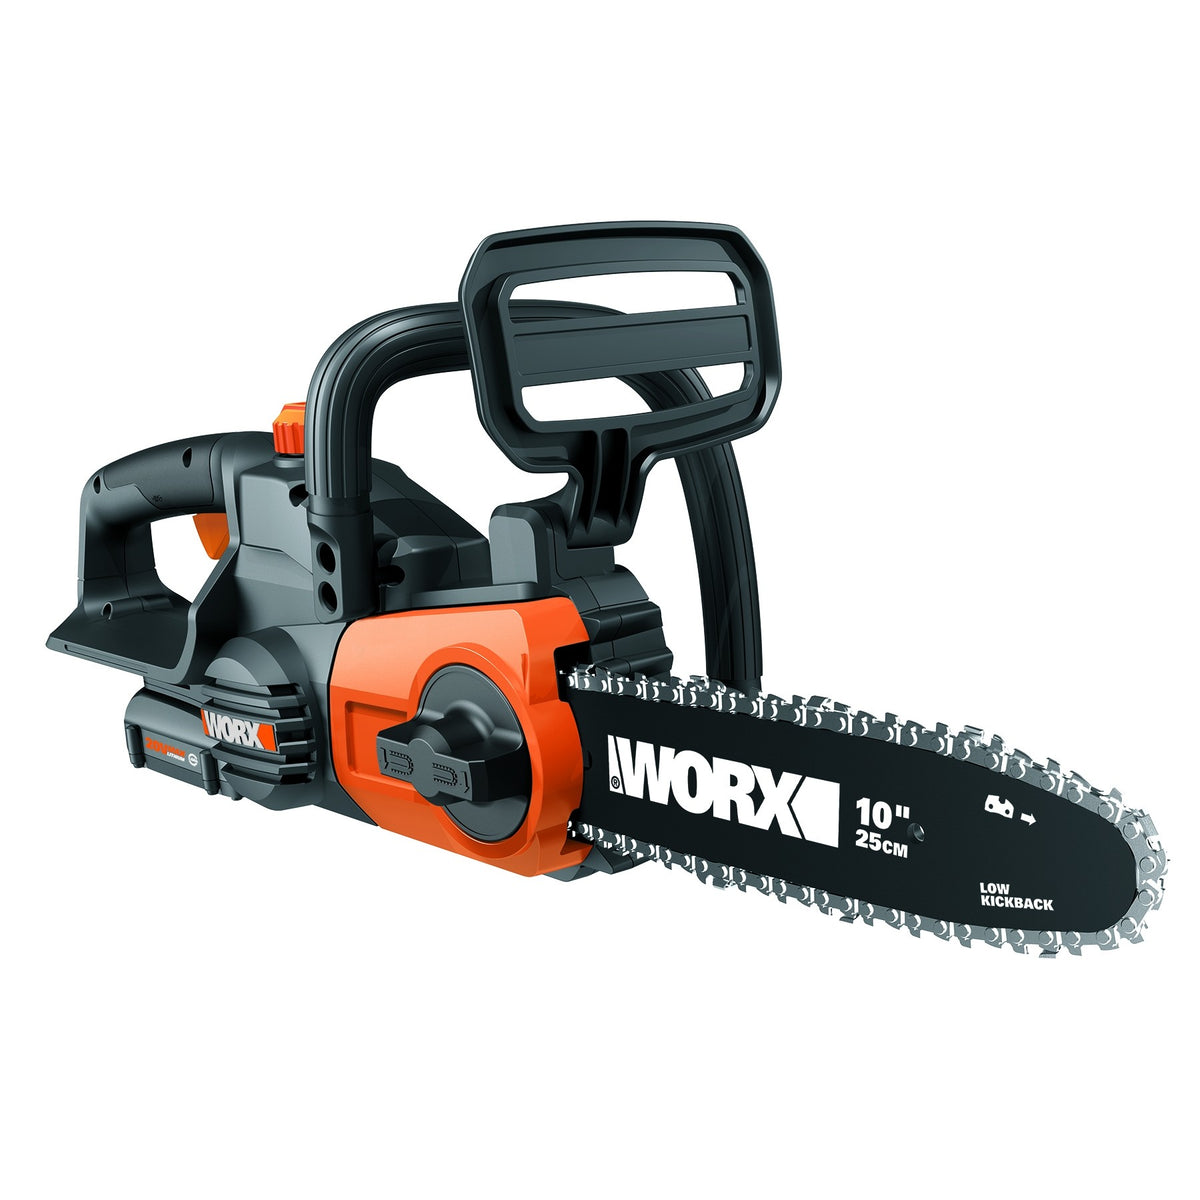 BLACK+DECKER 6.5 Amp 10 in. Electric Pole Saw (PP610)